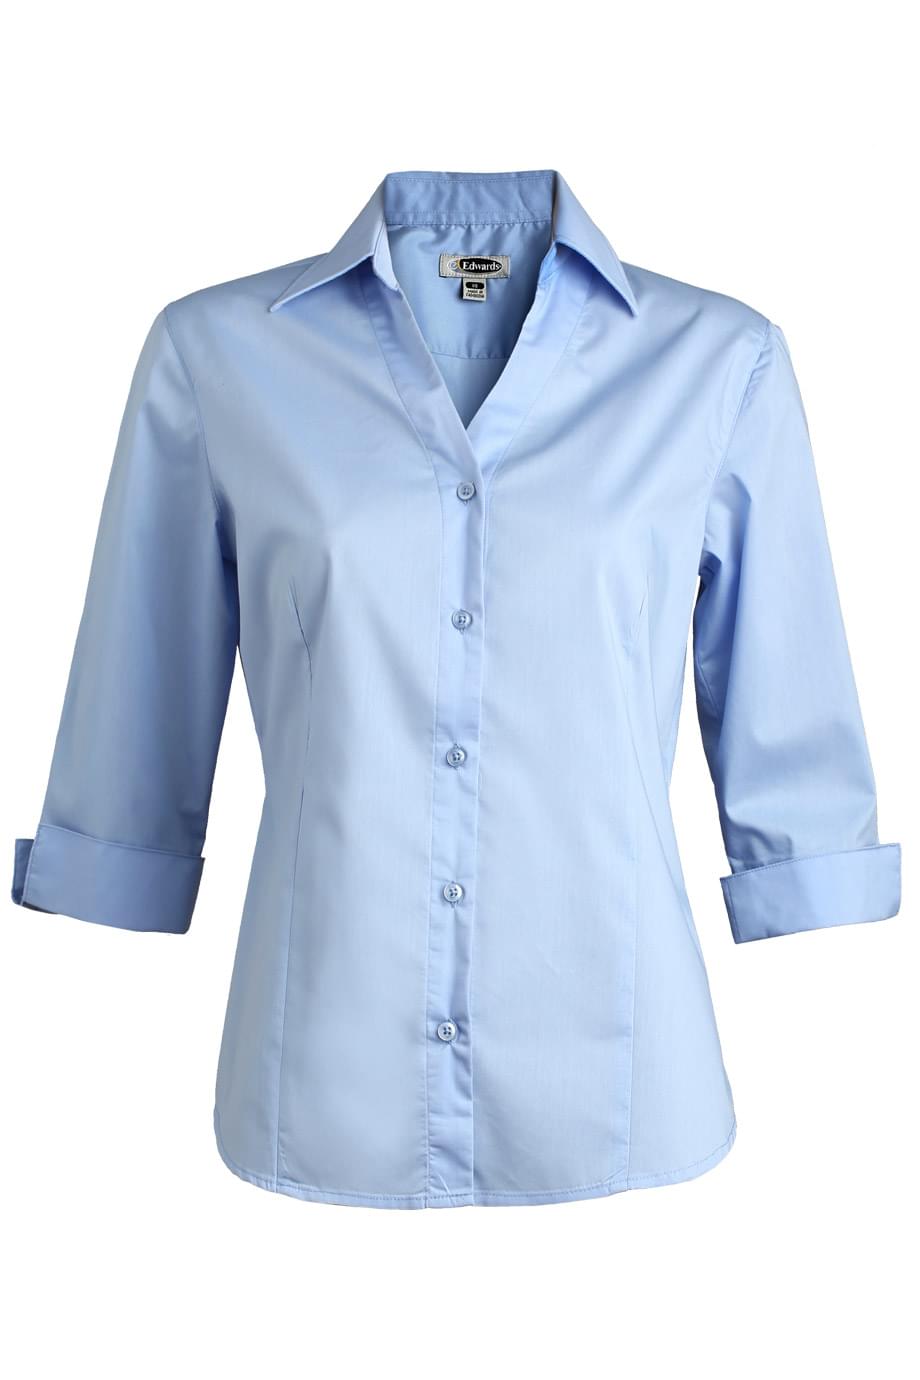 Corporate Apparel & Blouses | Embroidered Professional Blouses